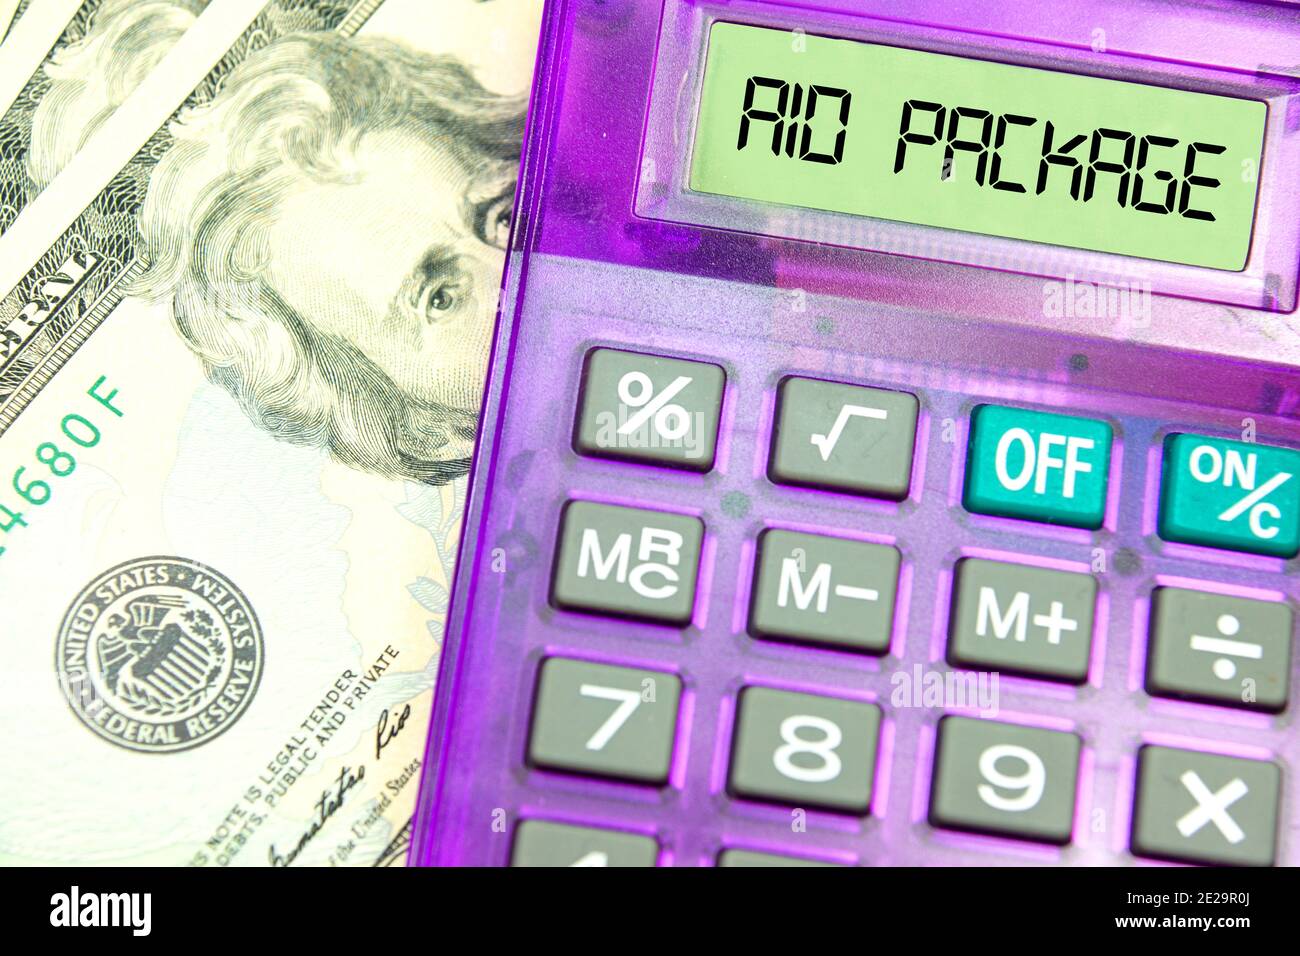 Dollar bills, calculator and aid package for the US economy Stock Photo